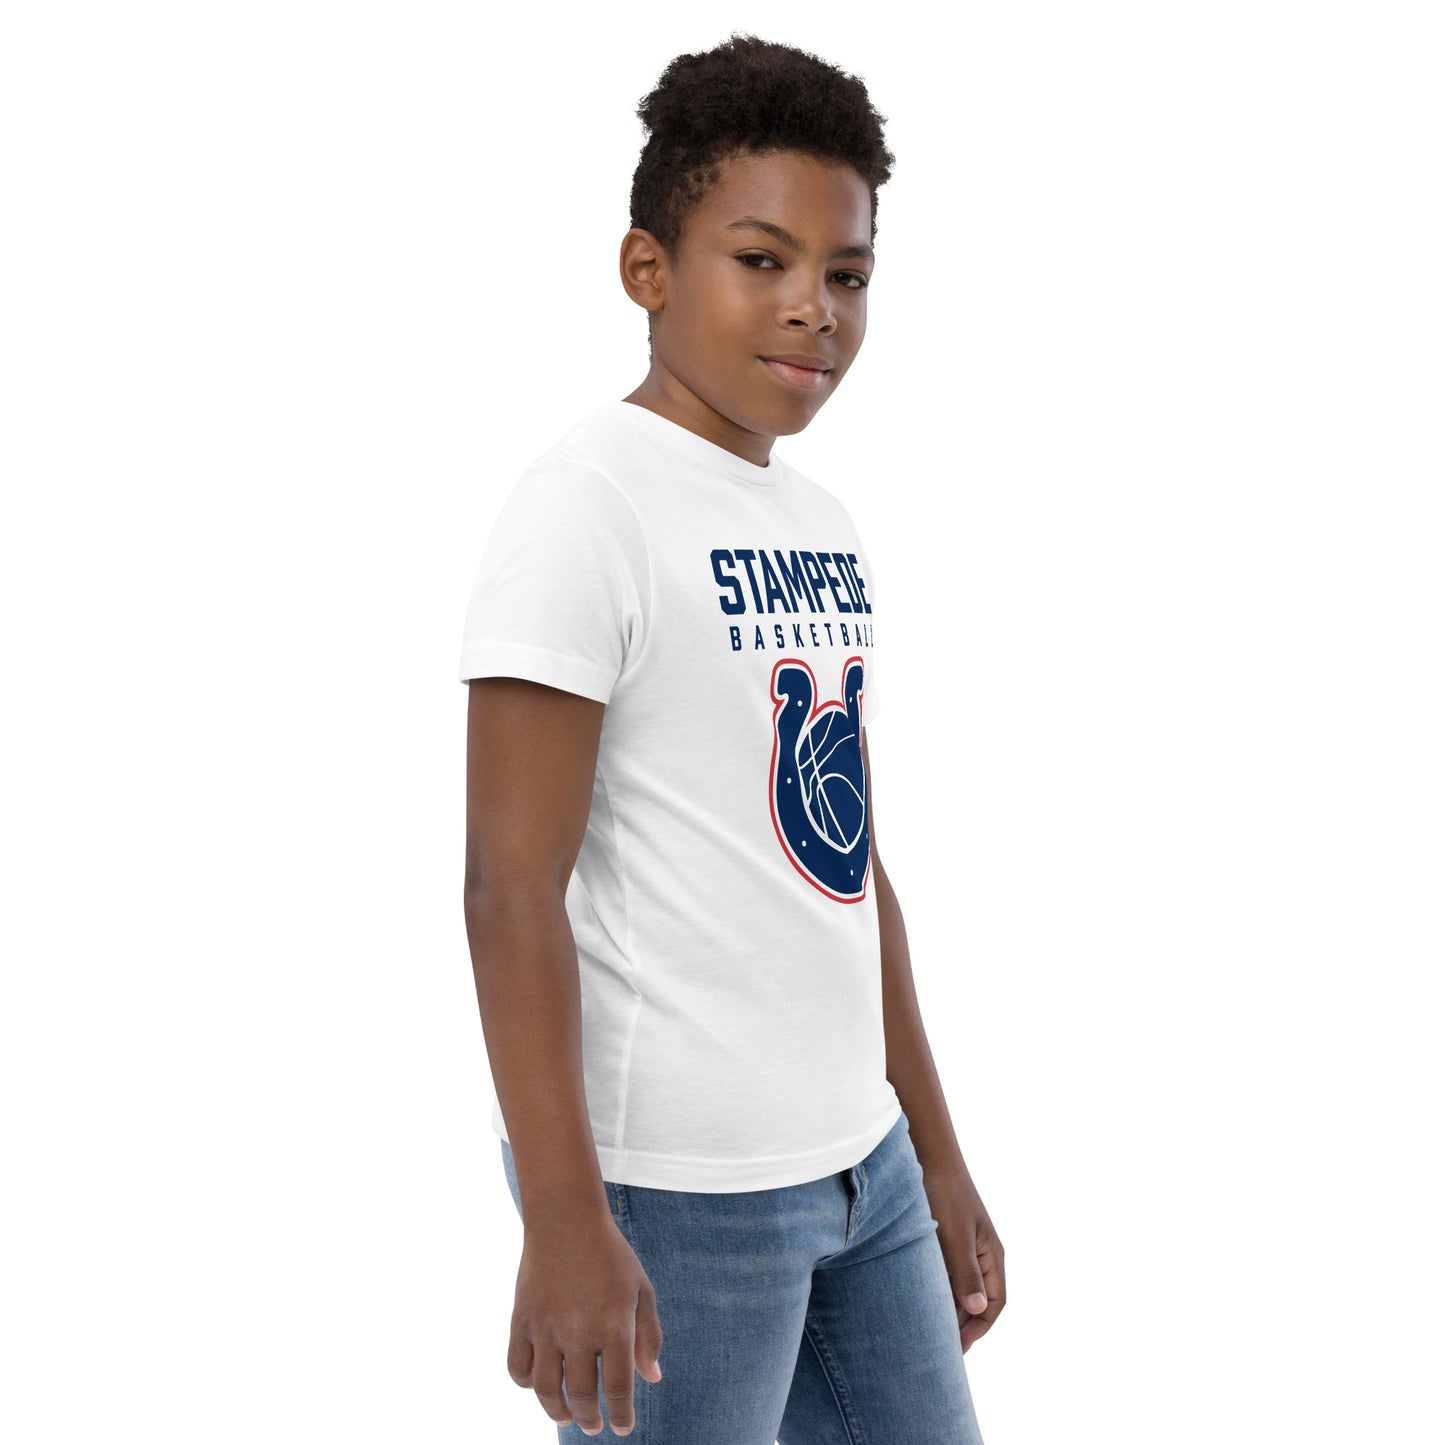 Youth Stampede t-shirt